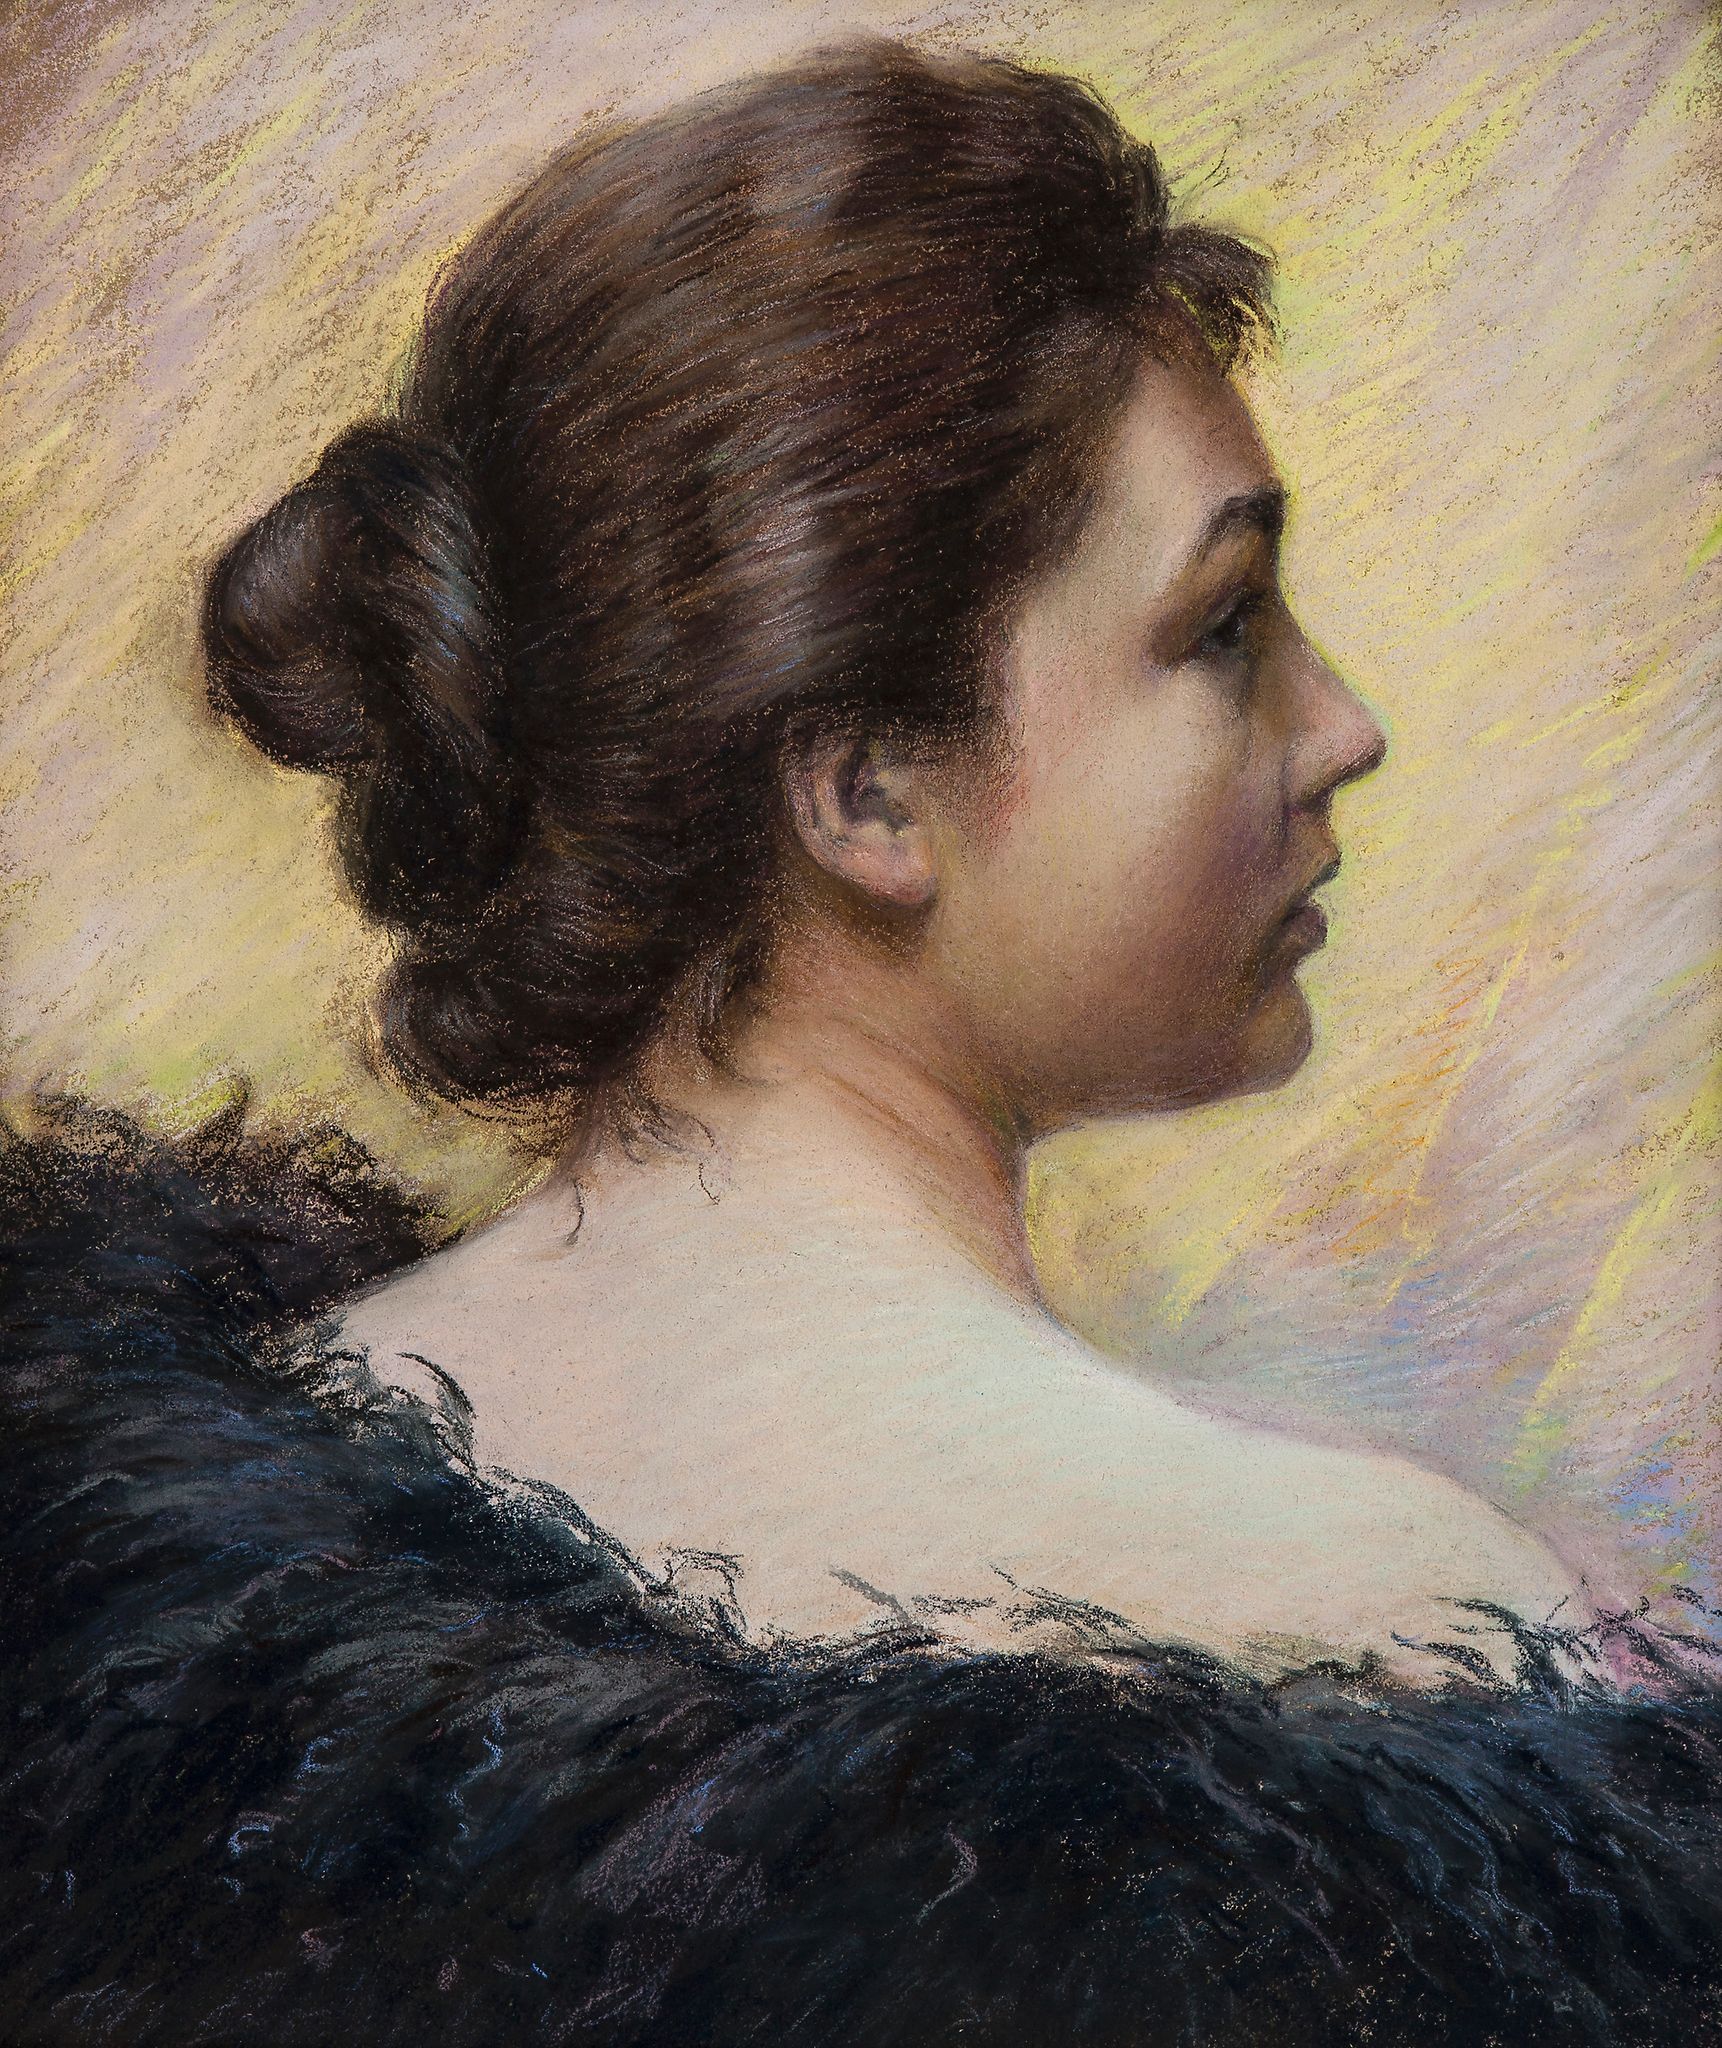 Attributed to Mme. Clemence Molliet (c.1855-1938) - Bust portrait of a lady seen from behind,